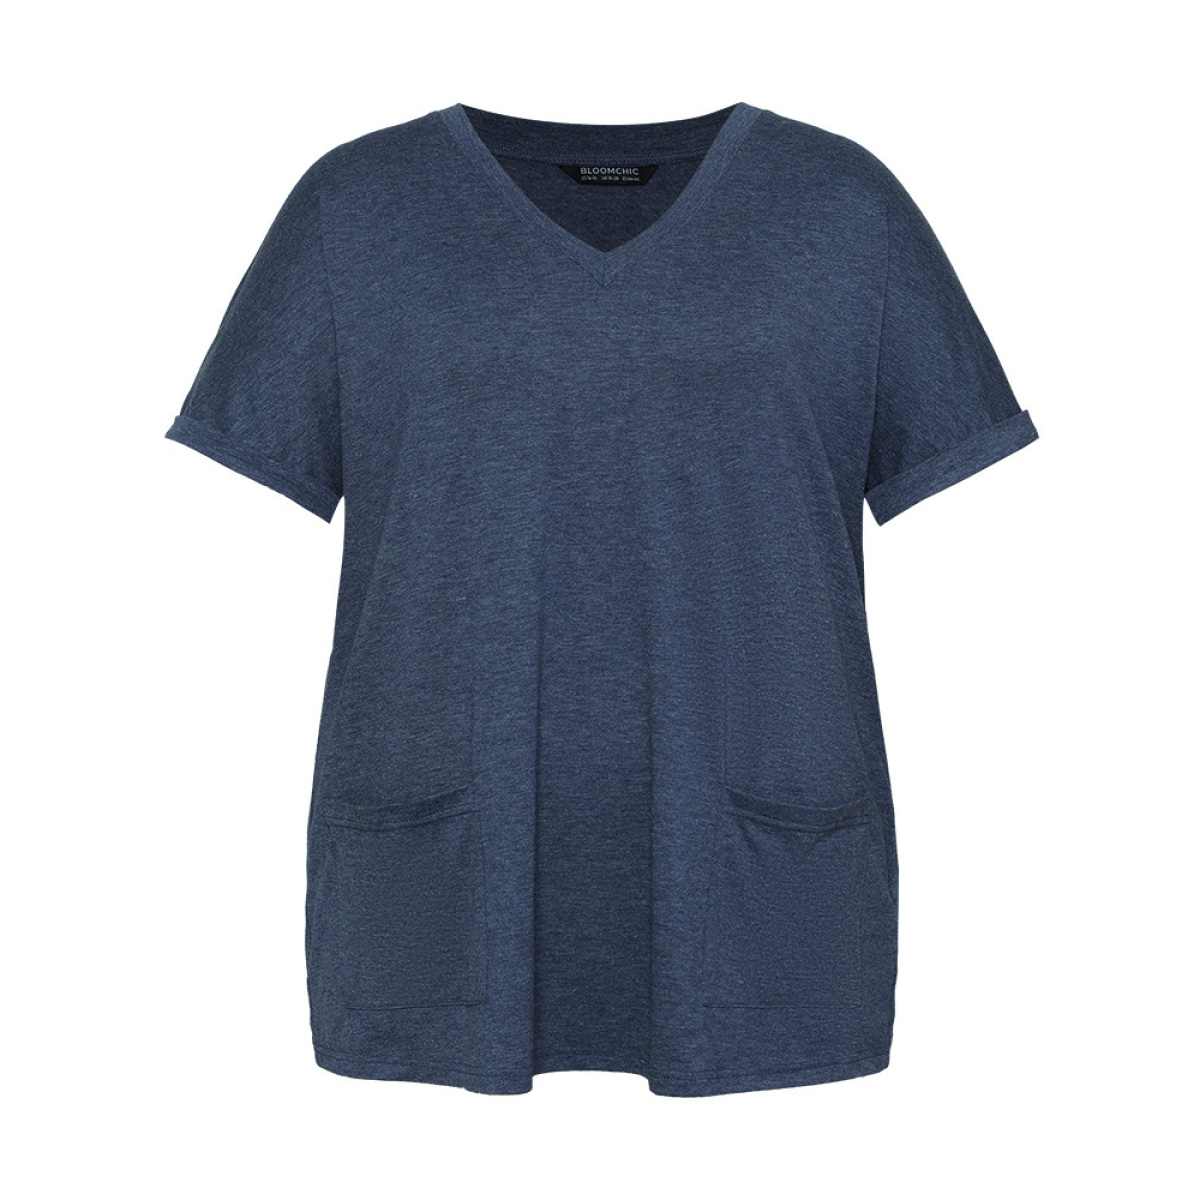 

Plus Size Plain Patched Pocket Cuffed Sleeve Heather T-shirt Blue Women Casual Heather Plain V-neck Dailywear T-shirts BloomChic